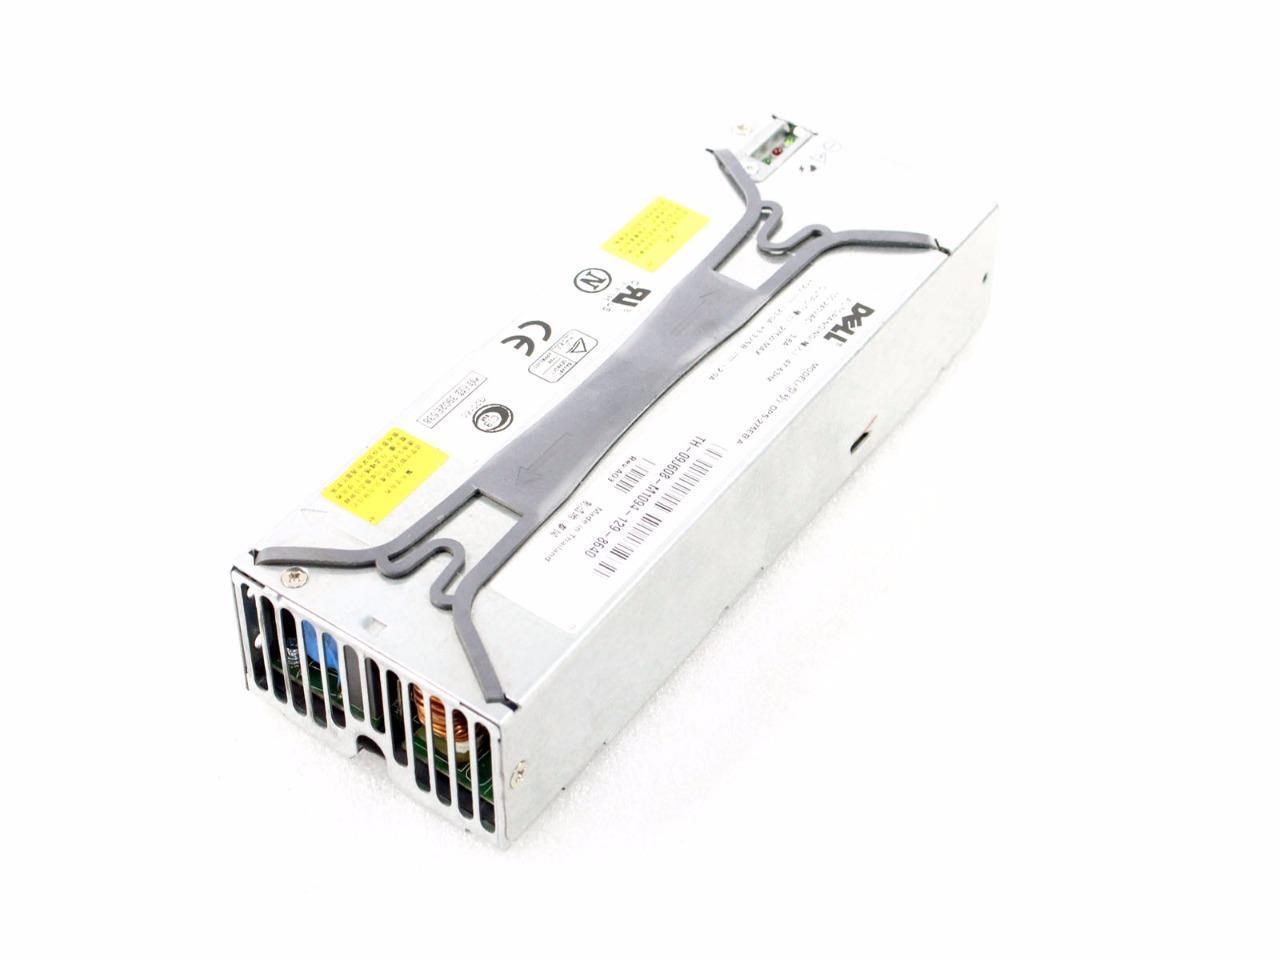 09J608 dps 275eb dell dps 275eb 275w power supply for poweredge 1650